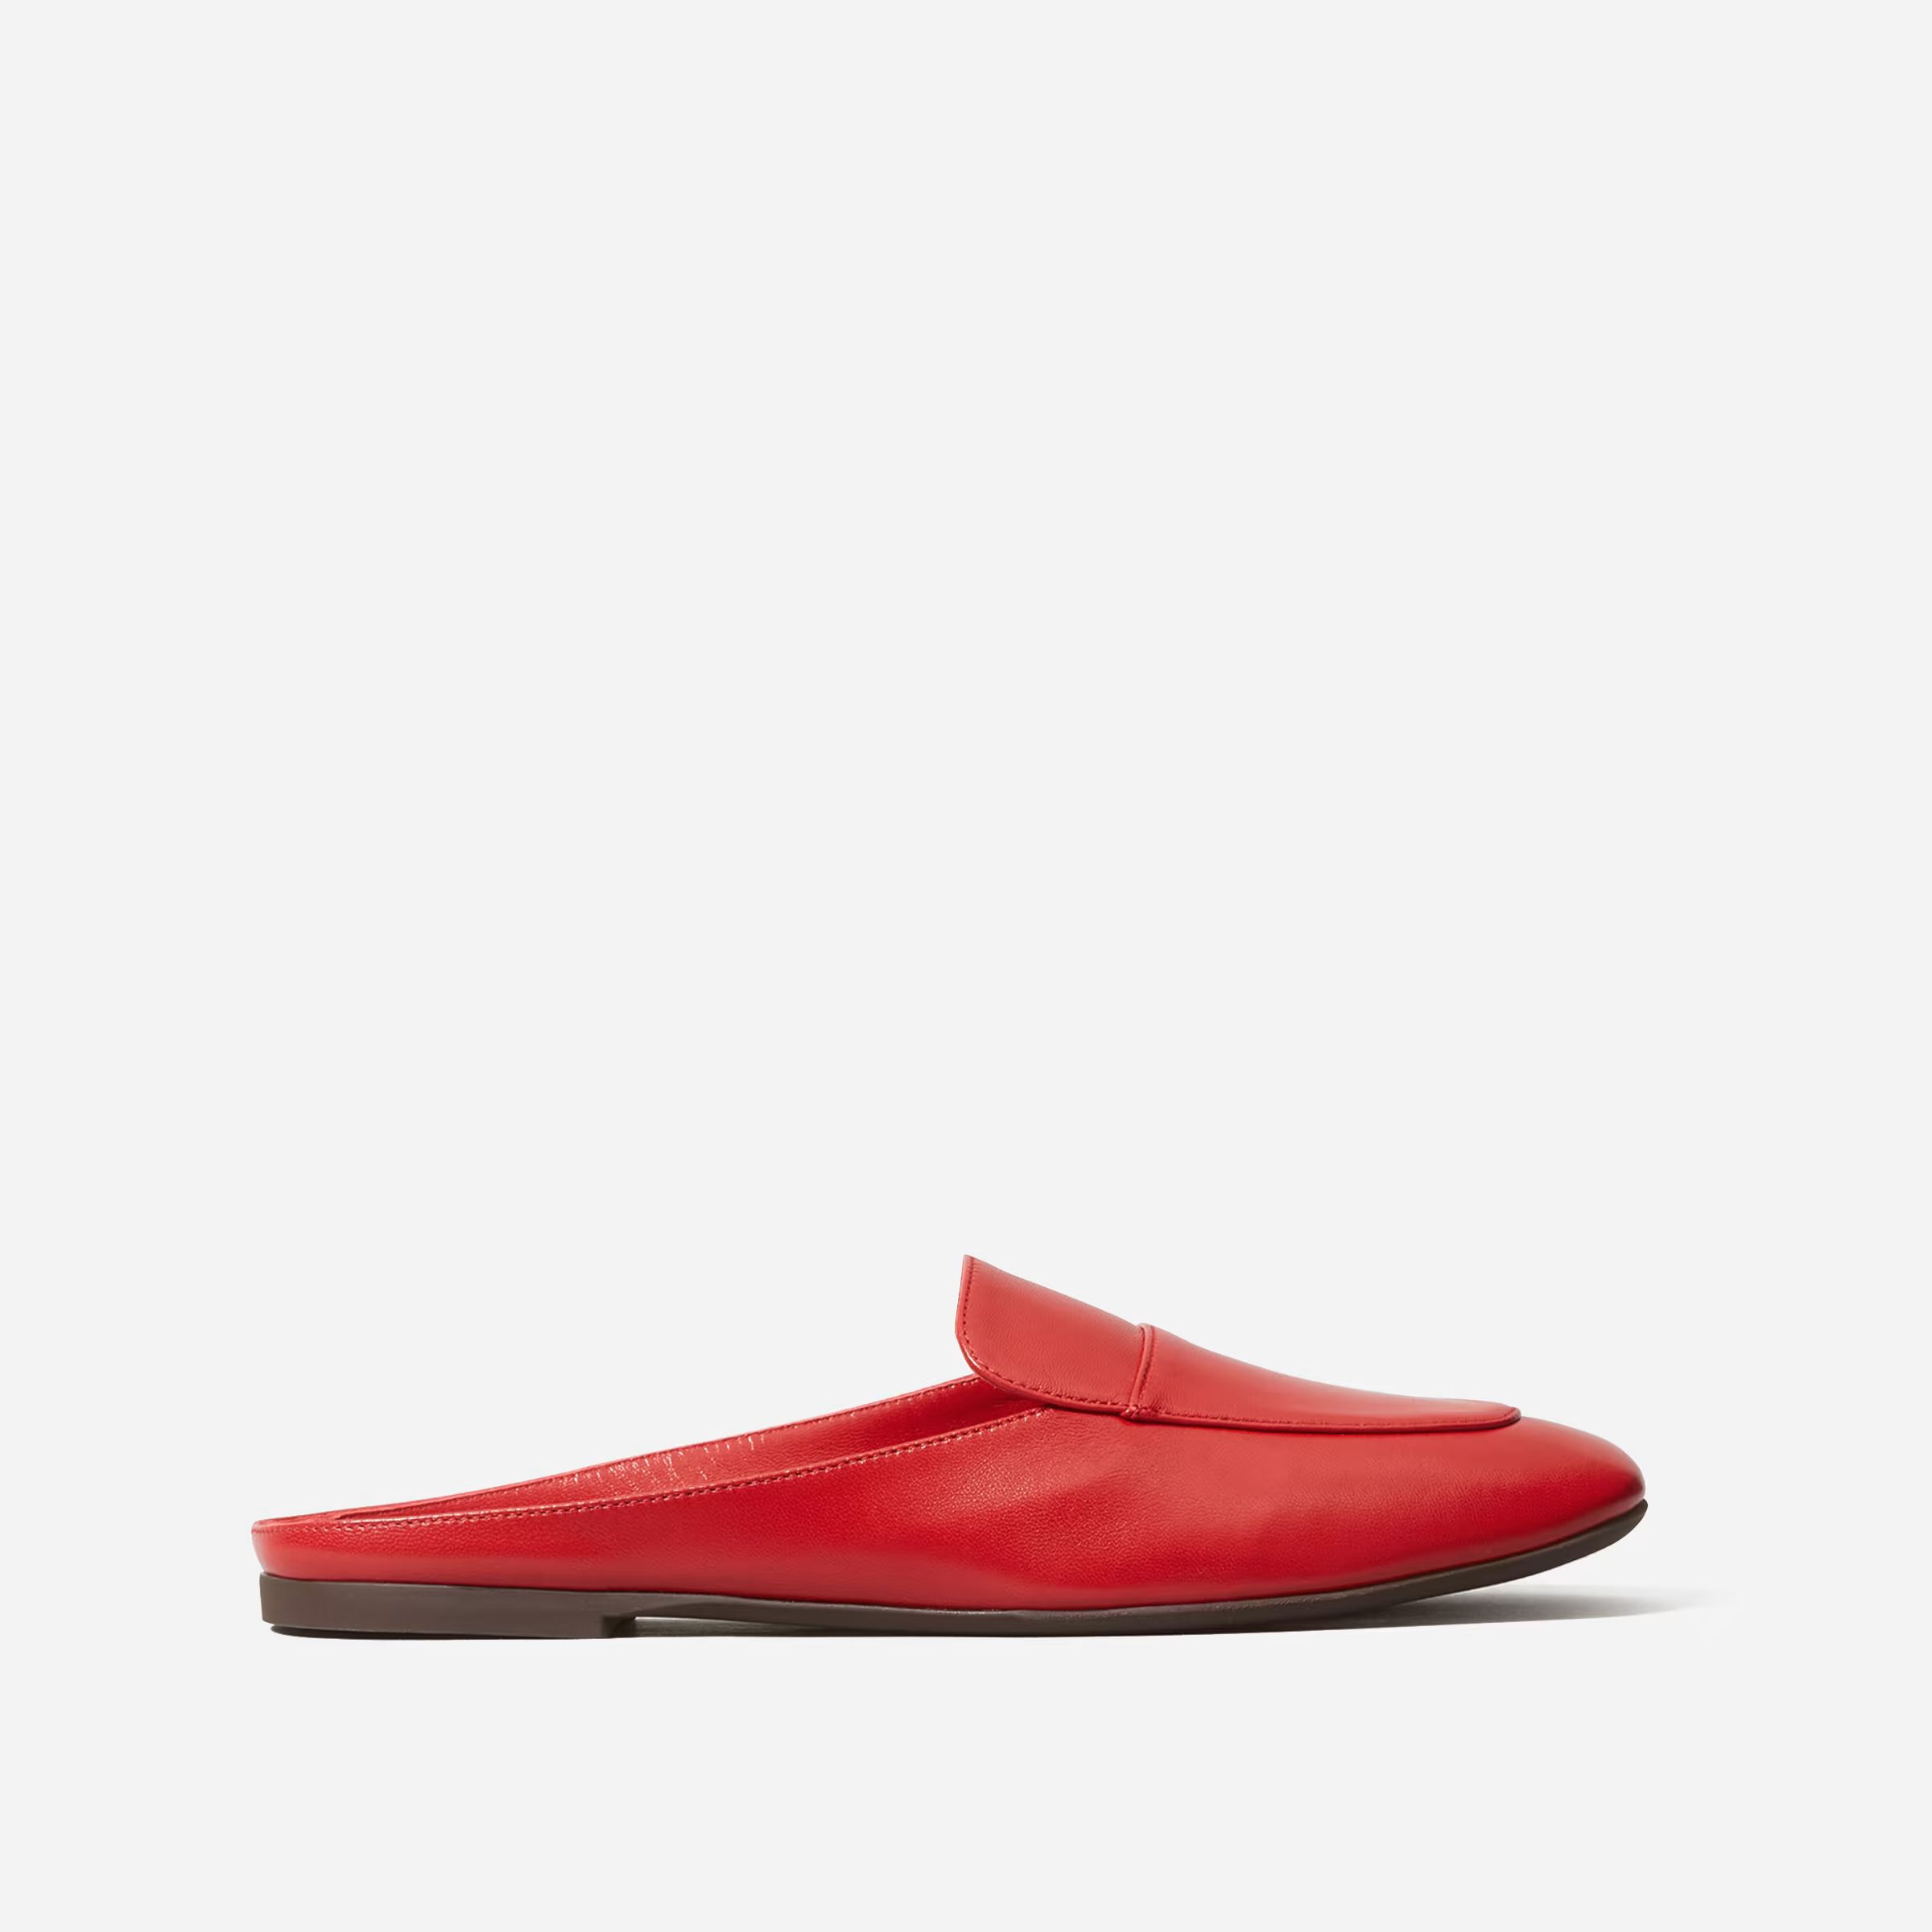 HomeWomenLoafers & MulesThe Day Loafer Mule | Everlane